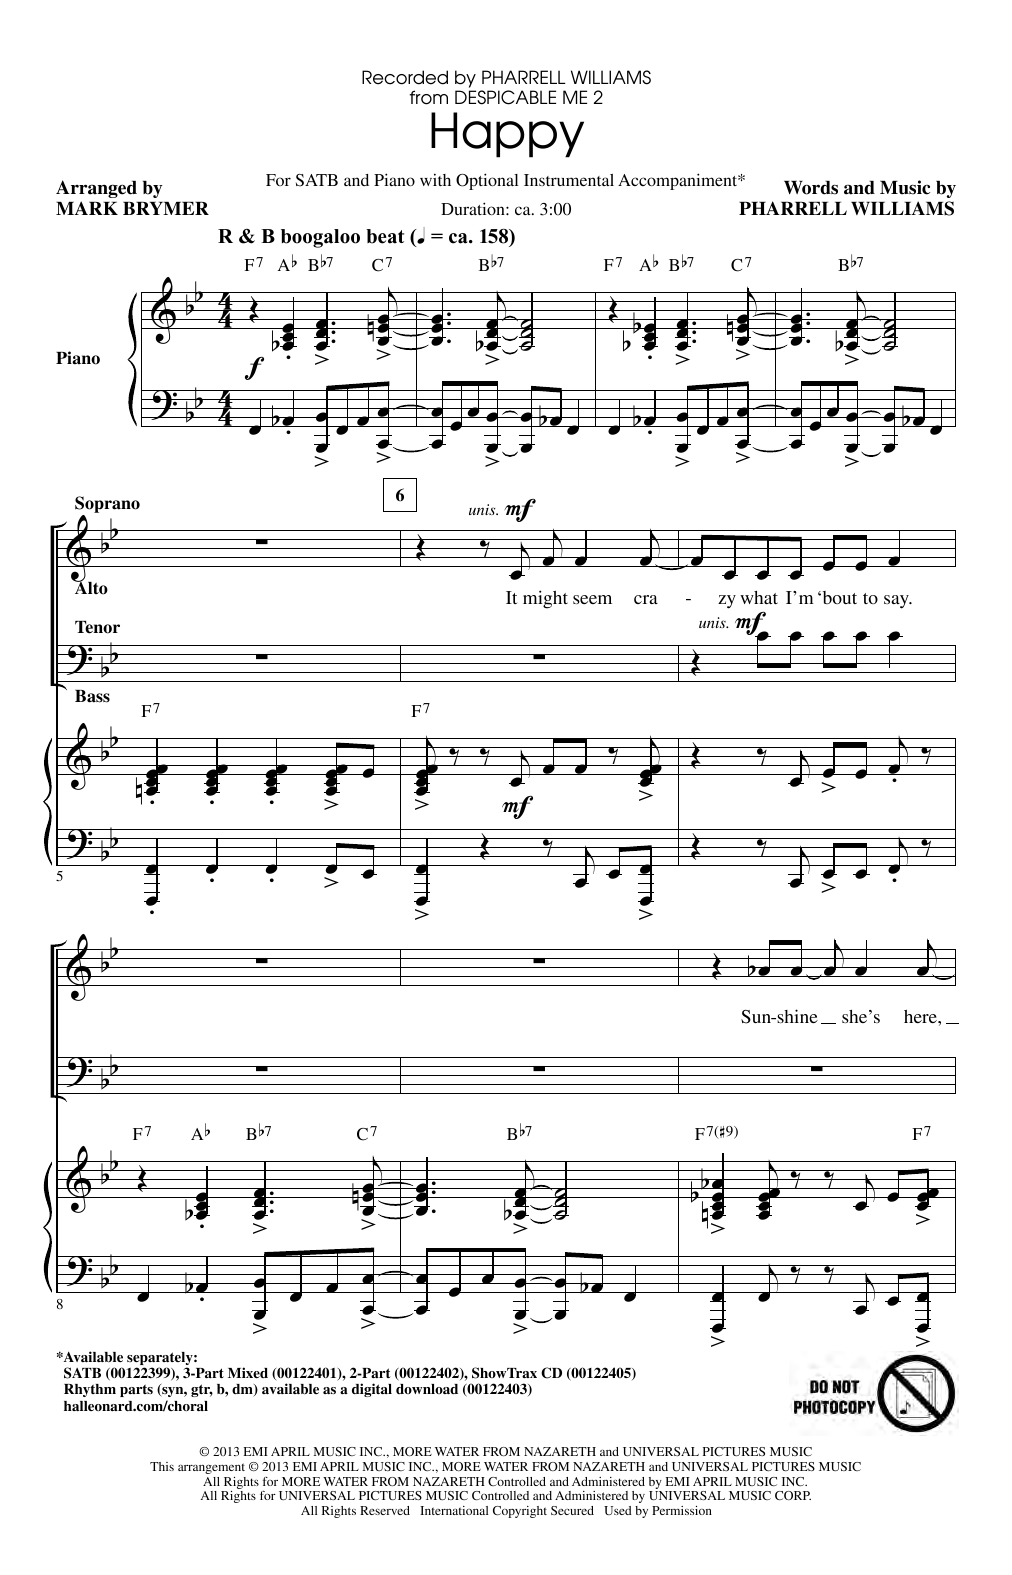 Pharrell Williams Happy (arr. Mark Brymer) sheet music notes and chords - Download Printable PDF and start playing in minutes.